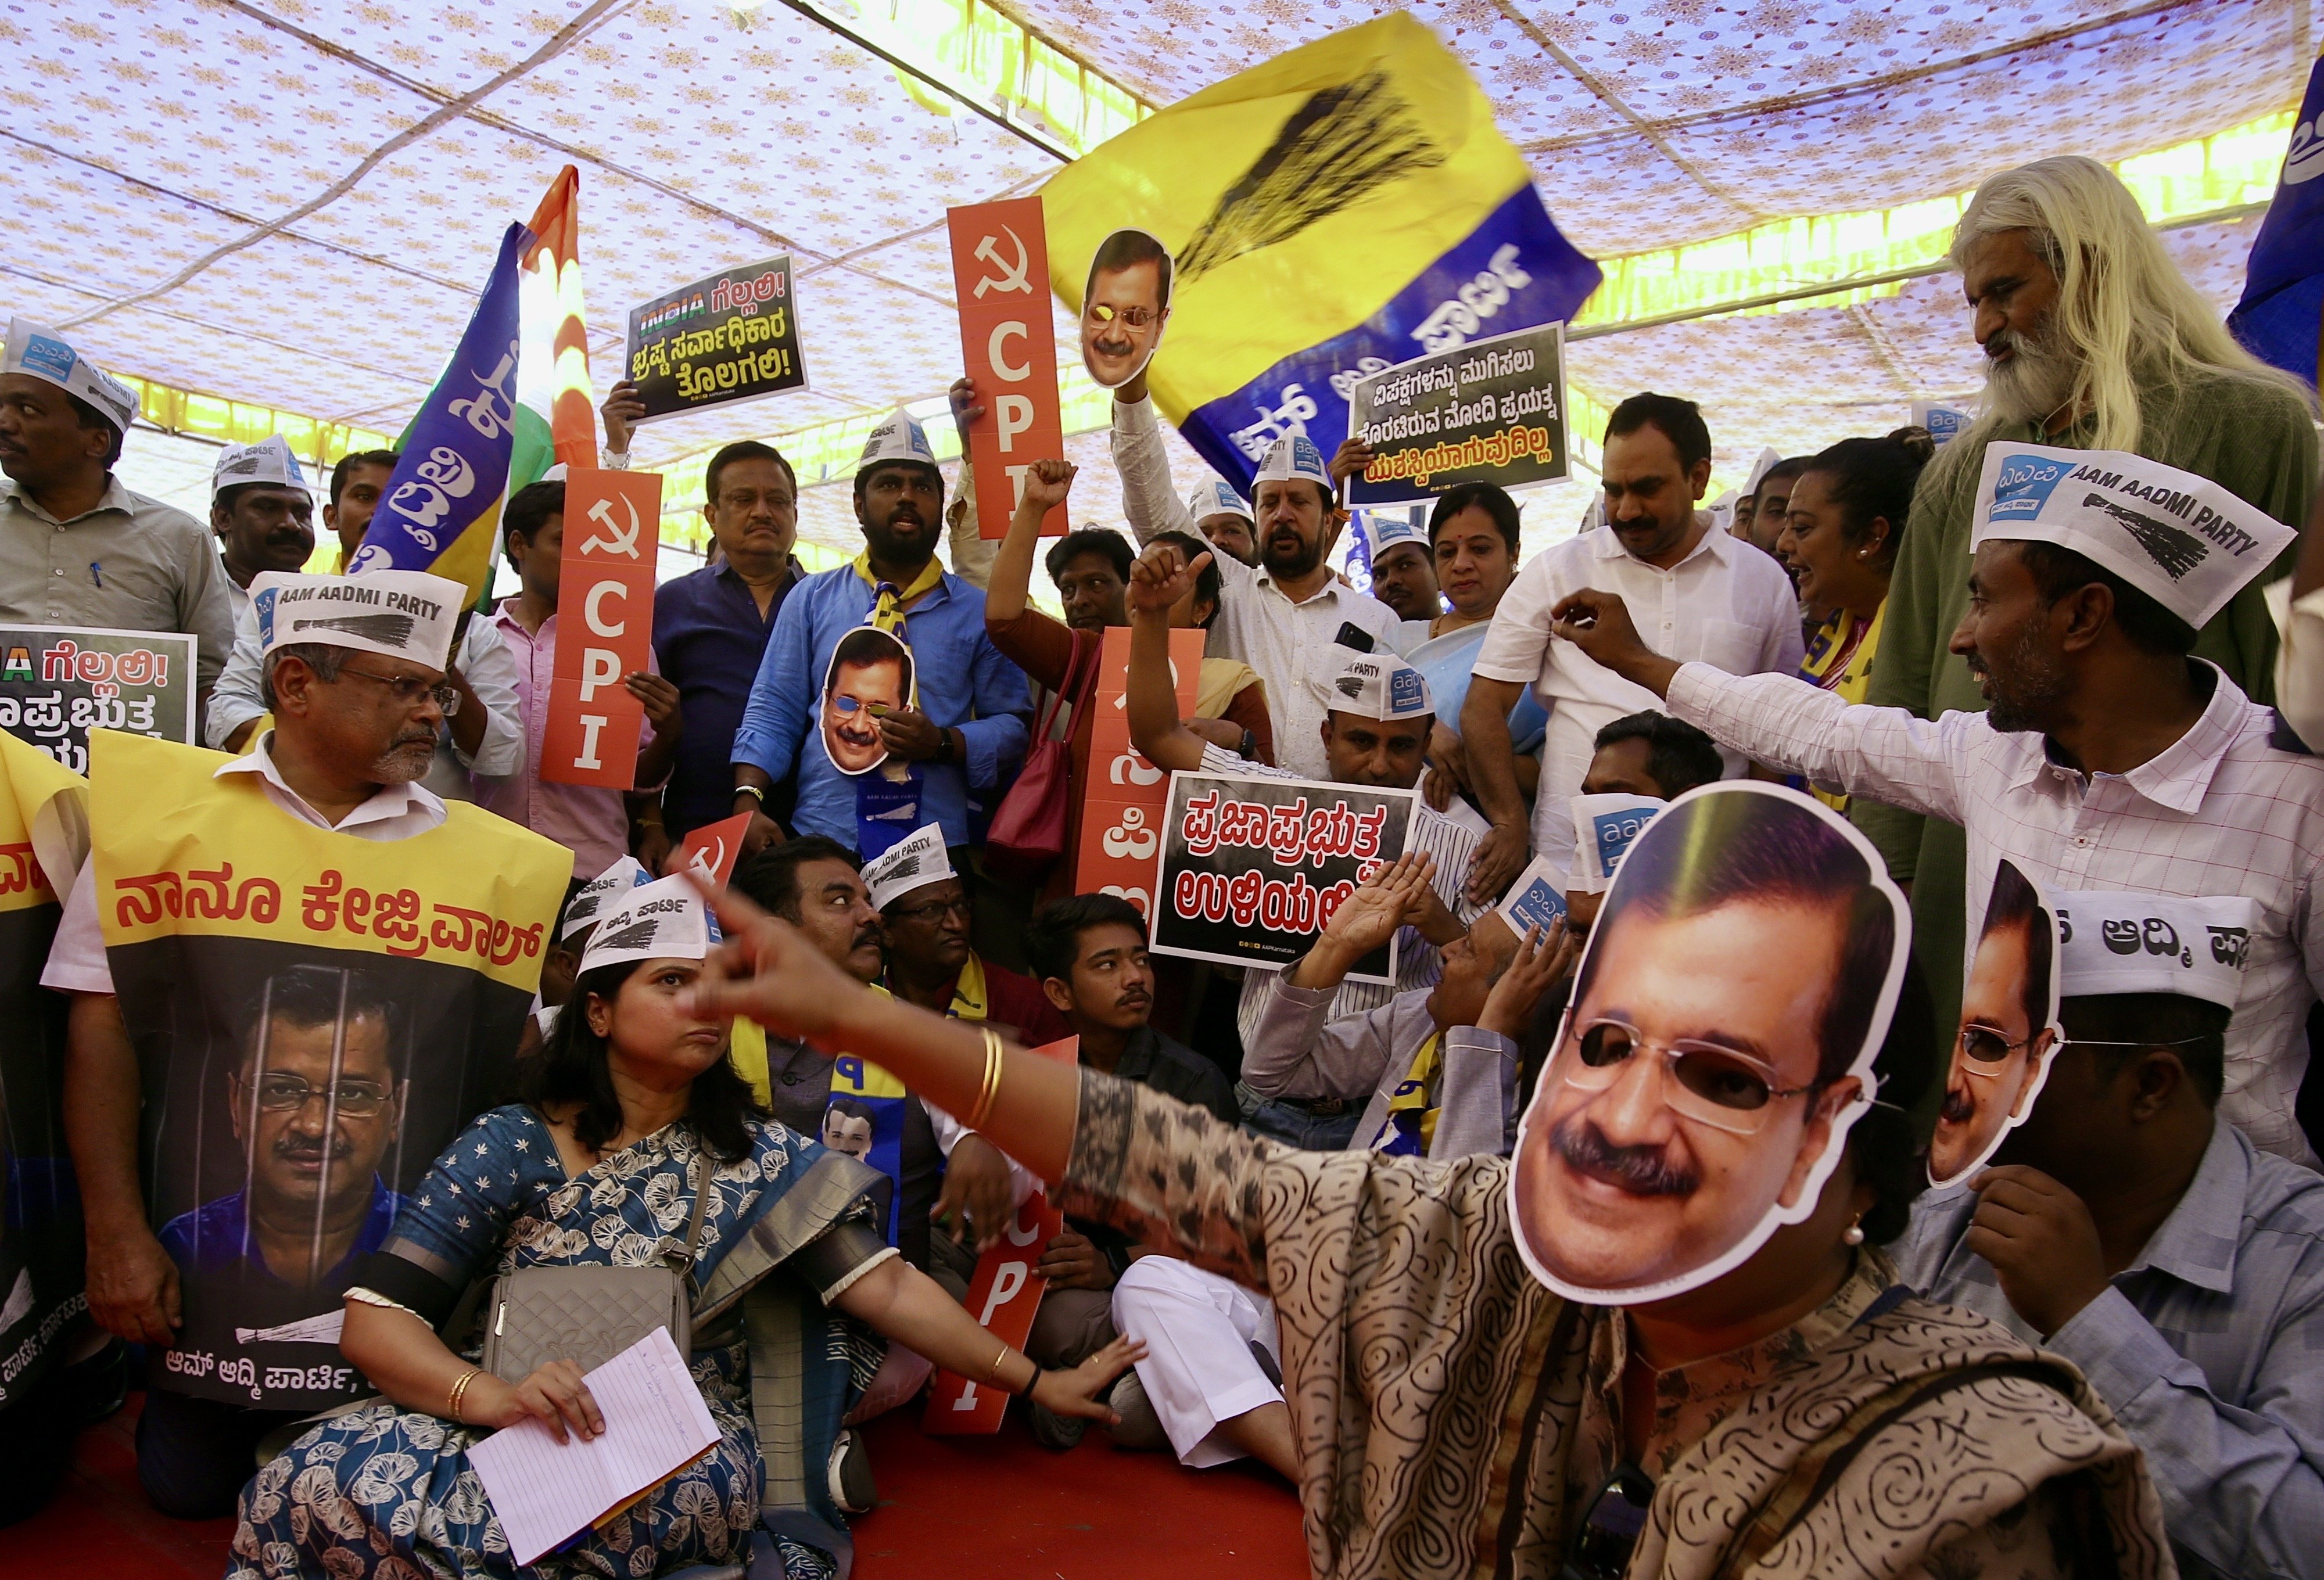 Members of the Aam Aadmi Party, Communist Party of India (CPI) and other NGOs hold placards and shout slogans against the Indian prime minister during a protest against the arrest of Delhi Chief Minister Arvind Kejriwal, in Bangalore on March 31. Photo: EPA-EFE